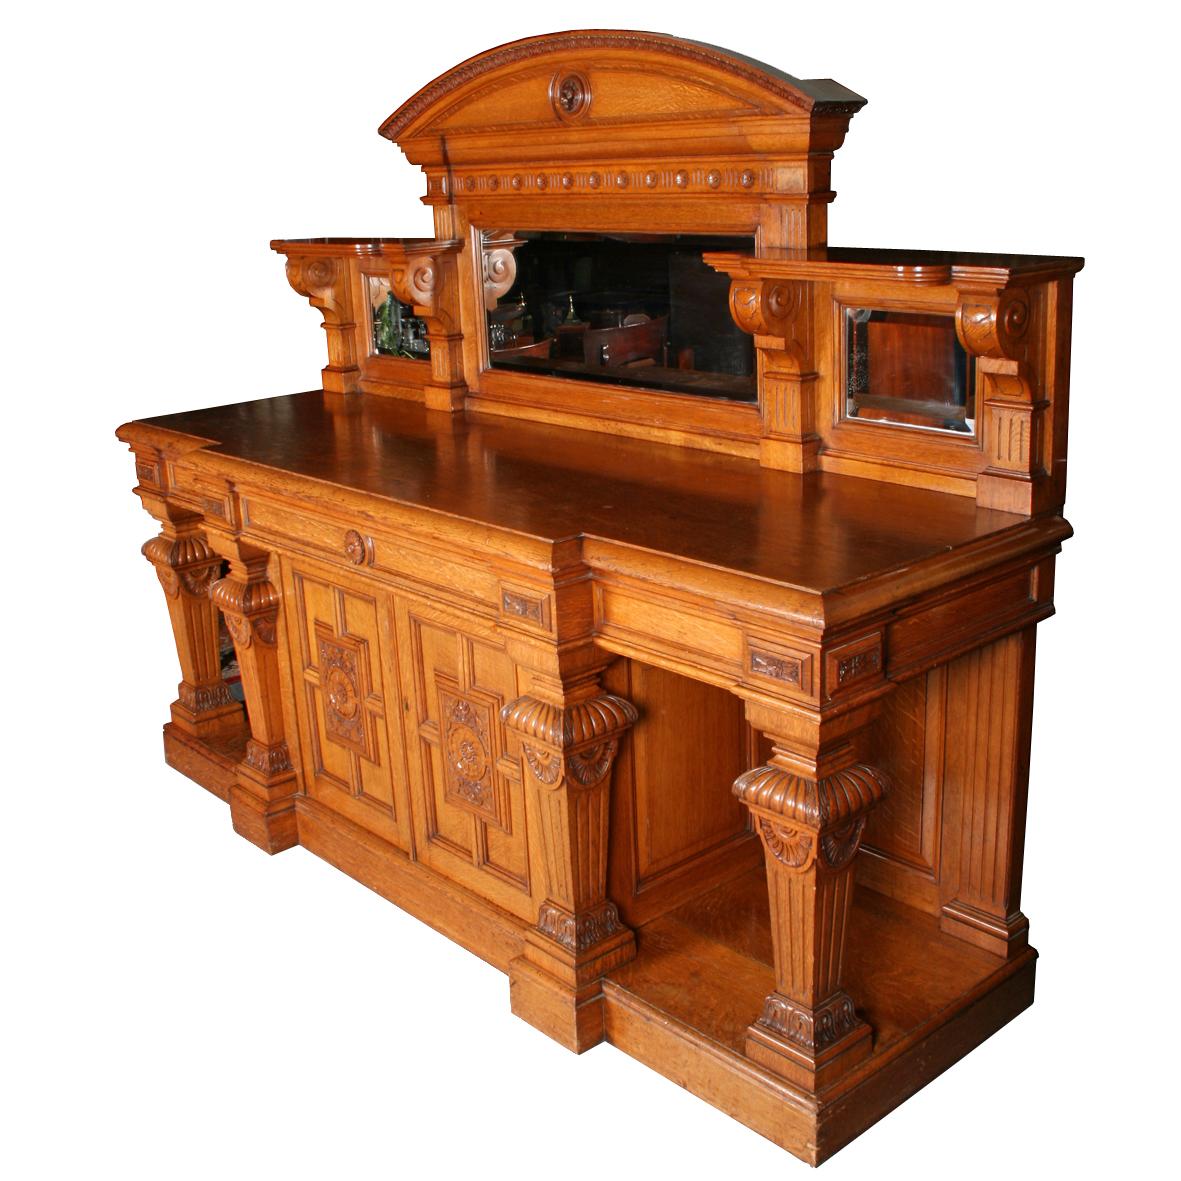 A large 19th century Victorian oak sideboard with a triple mirror back.

The base is breakfront in shape, has three concealed drawers in the front frieze, and four large square tapering and carved ballusters supporting the top.

One of the